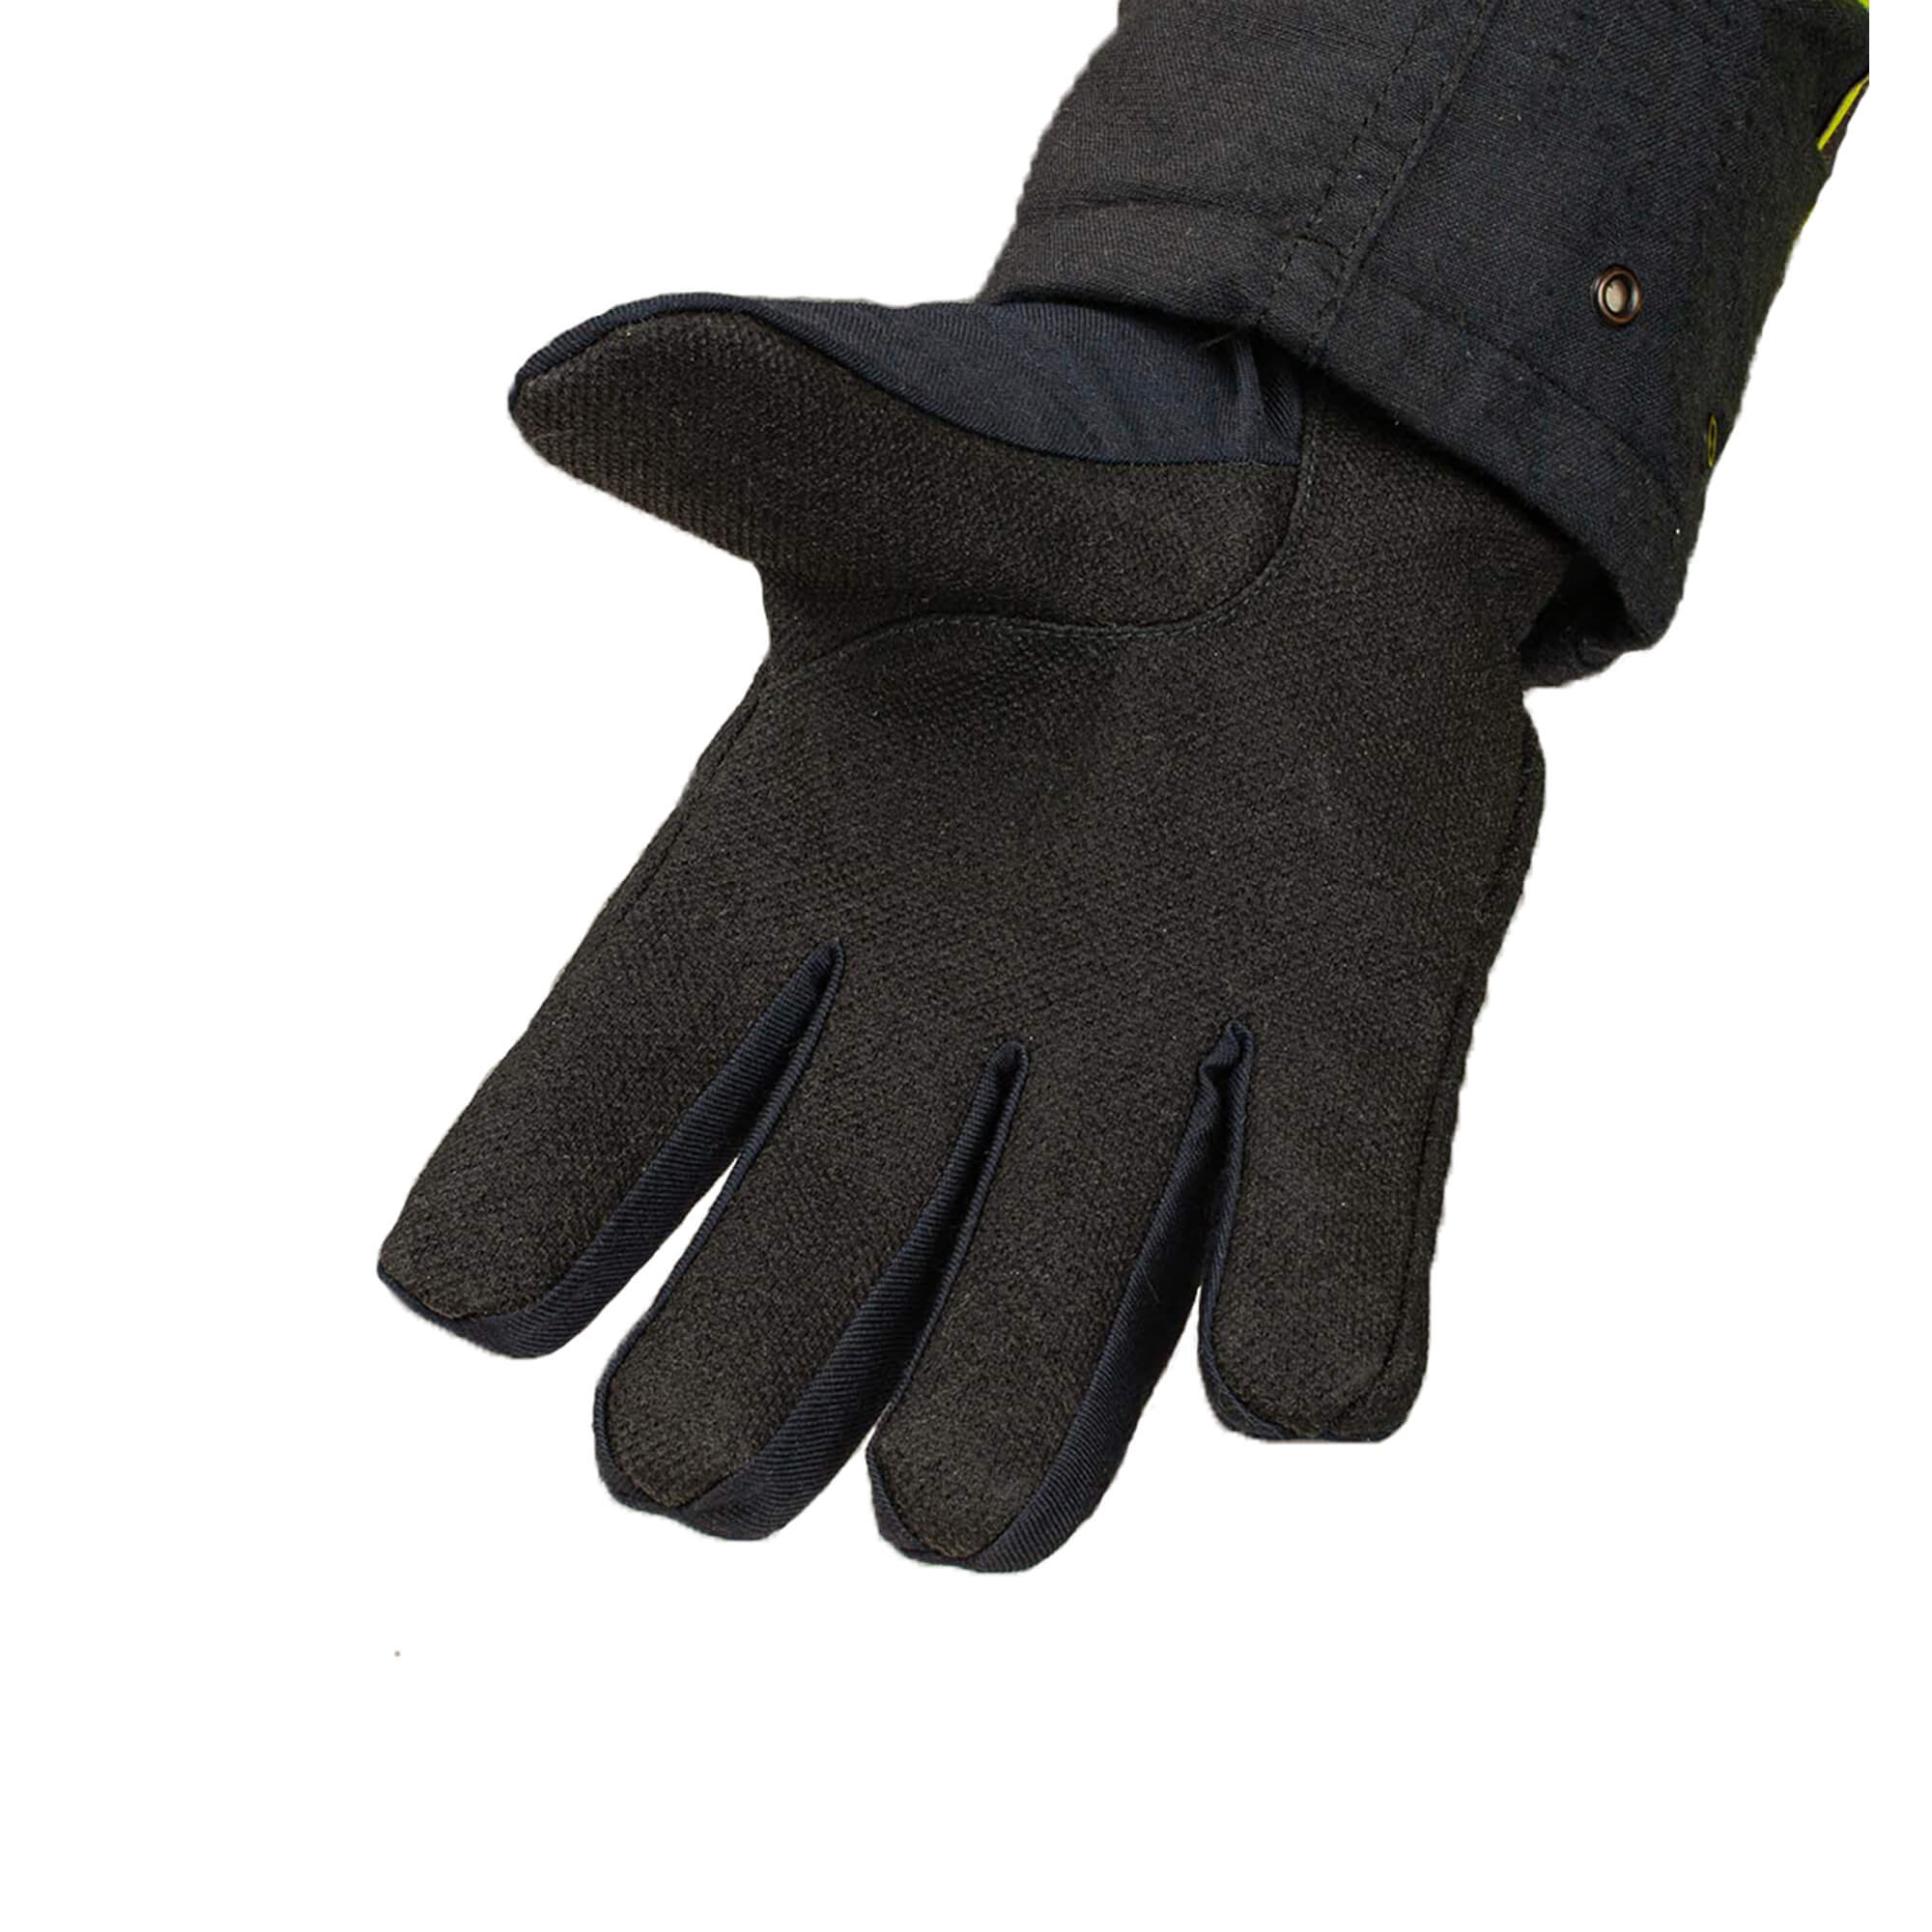 Protective gloves for firefighters Brela Easy